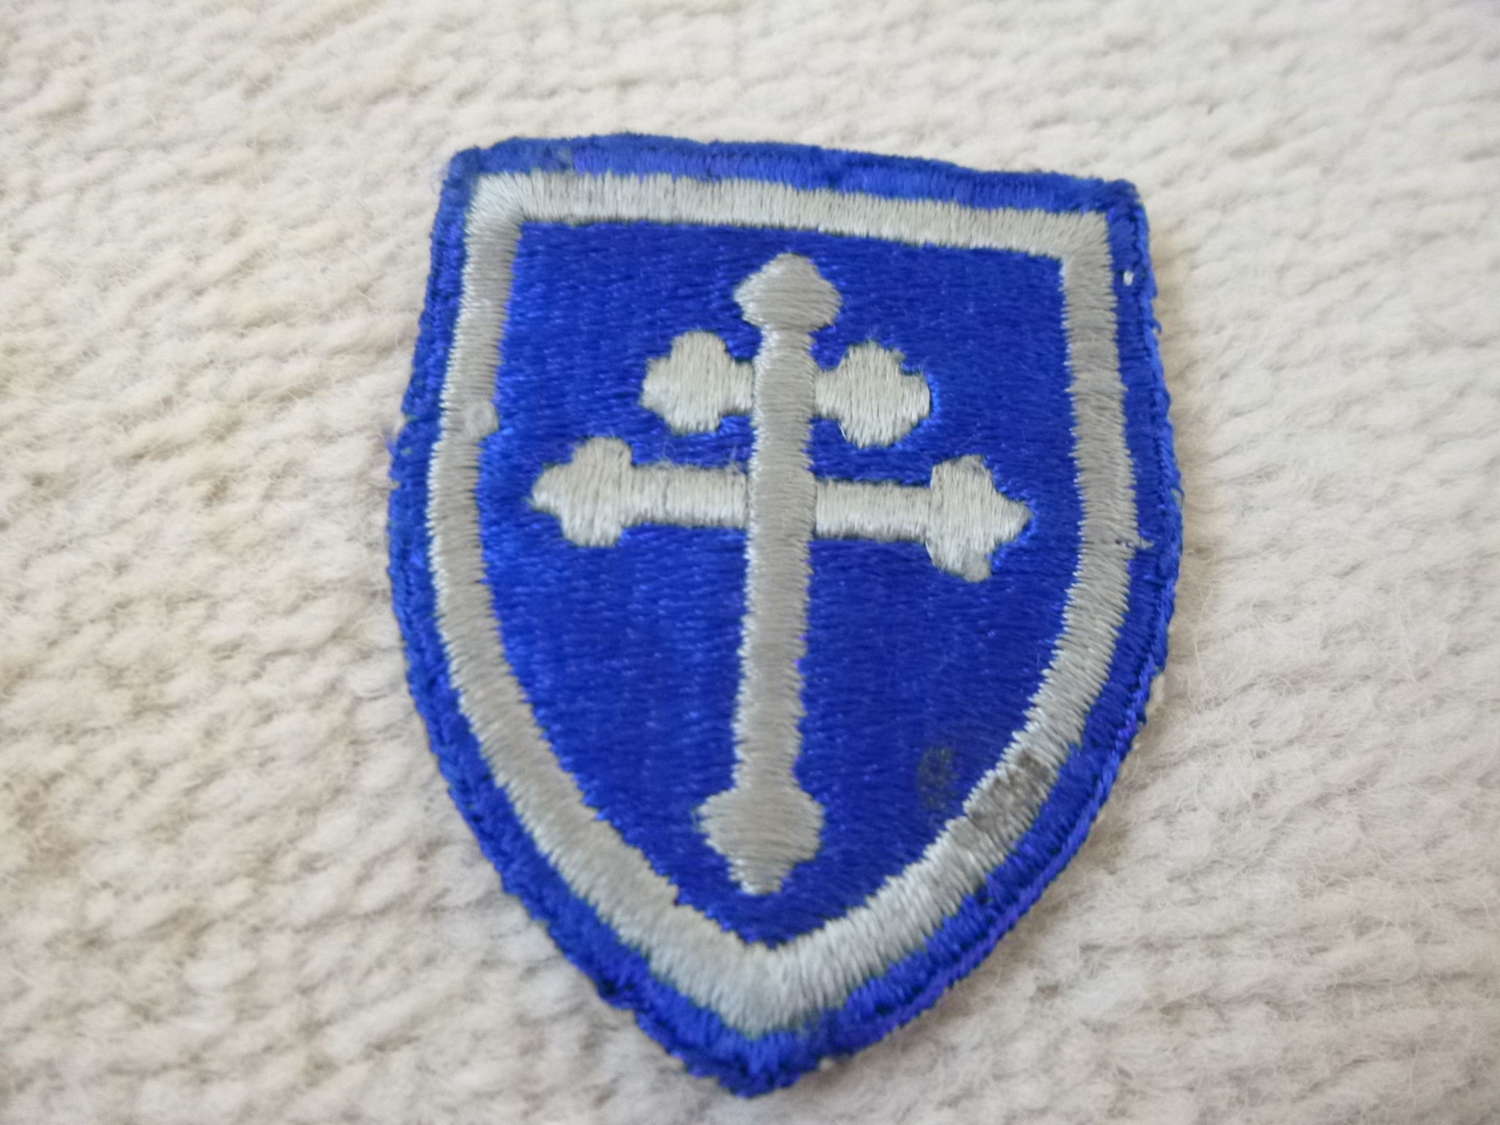 US army 79th infantry division patch